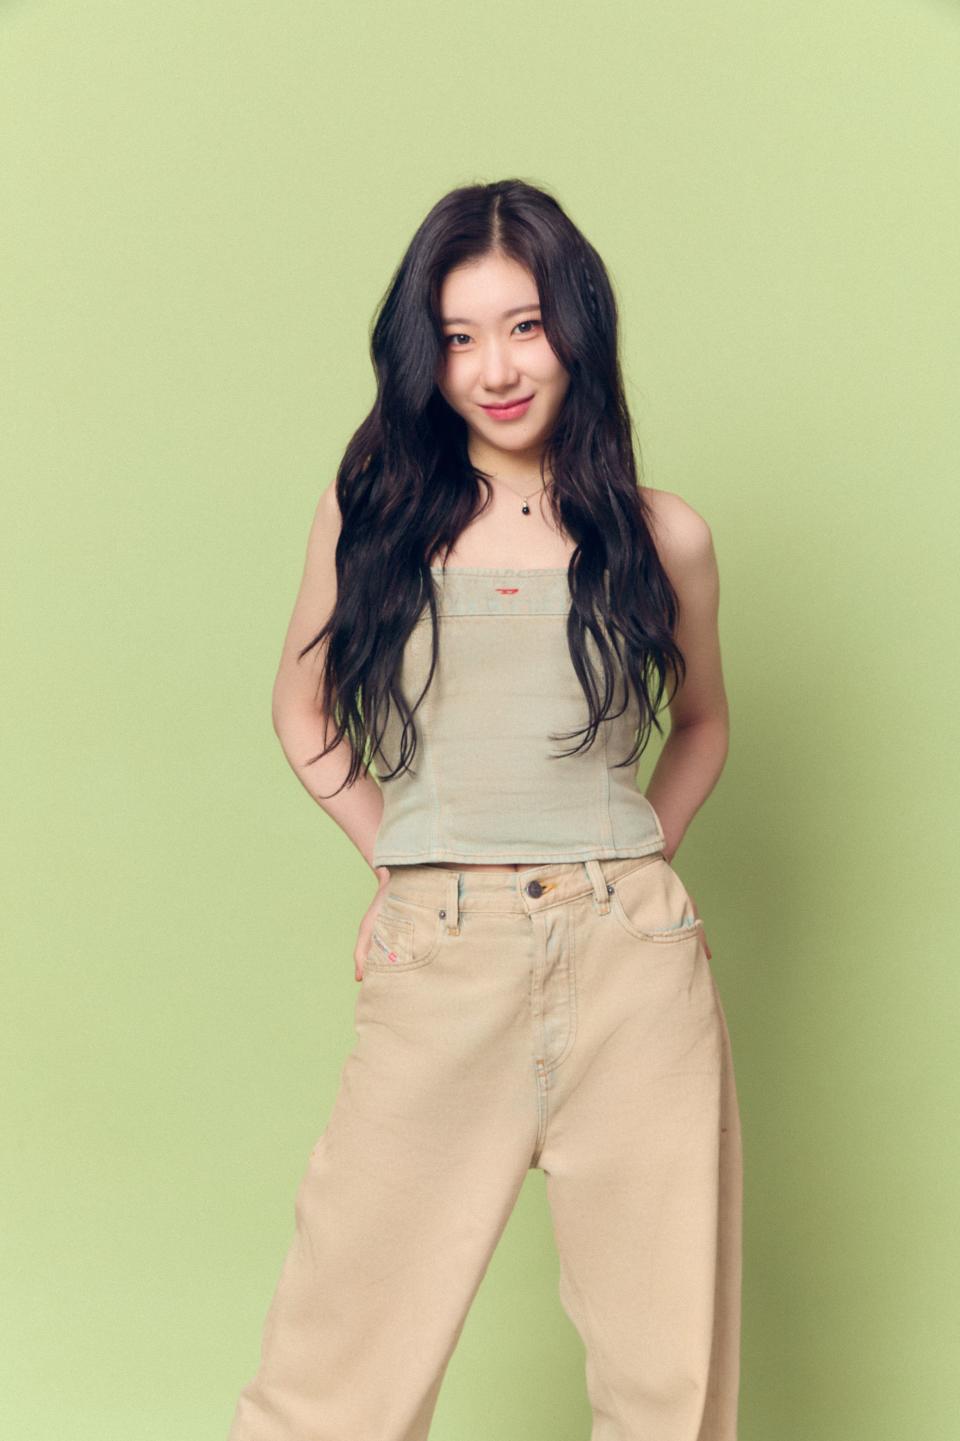 Chaeryeong from ITZY in a casual outfit with long, wavy hair, wearing a light tank top and pants, standing against a plain background